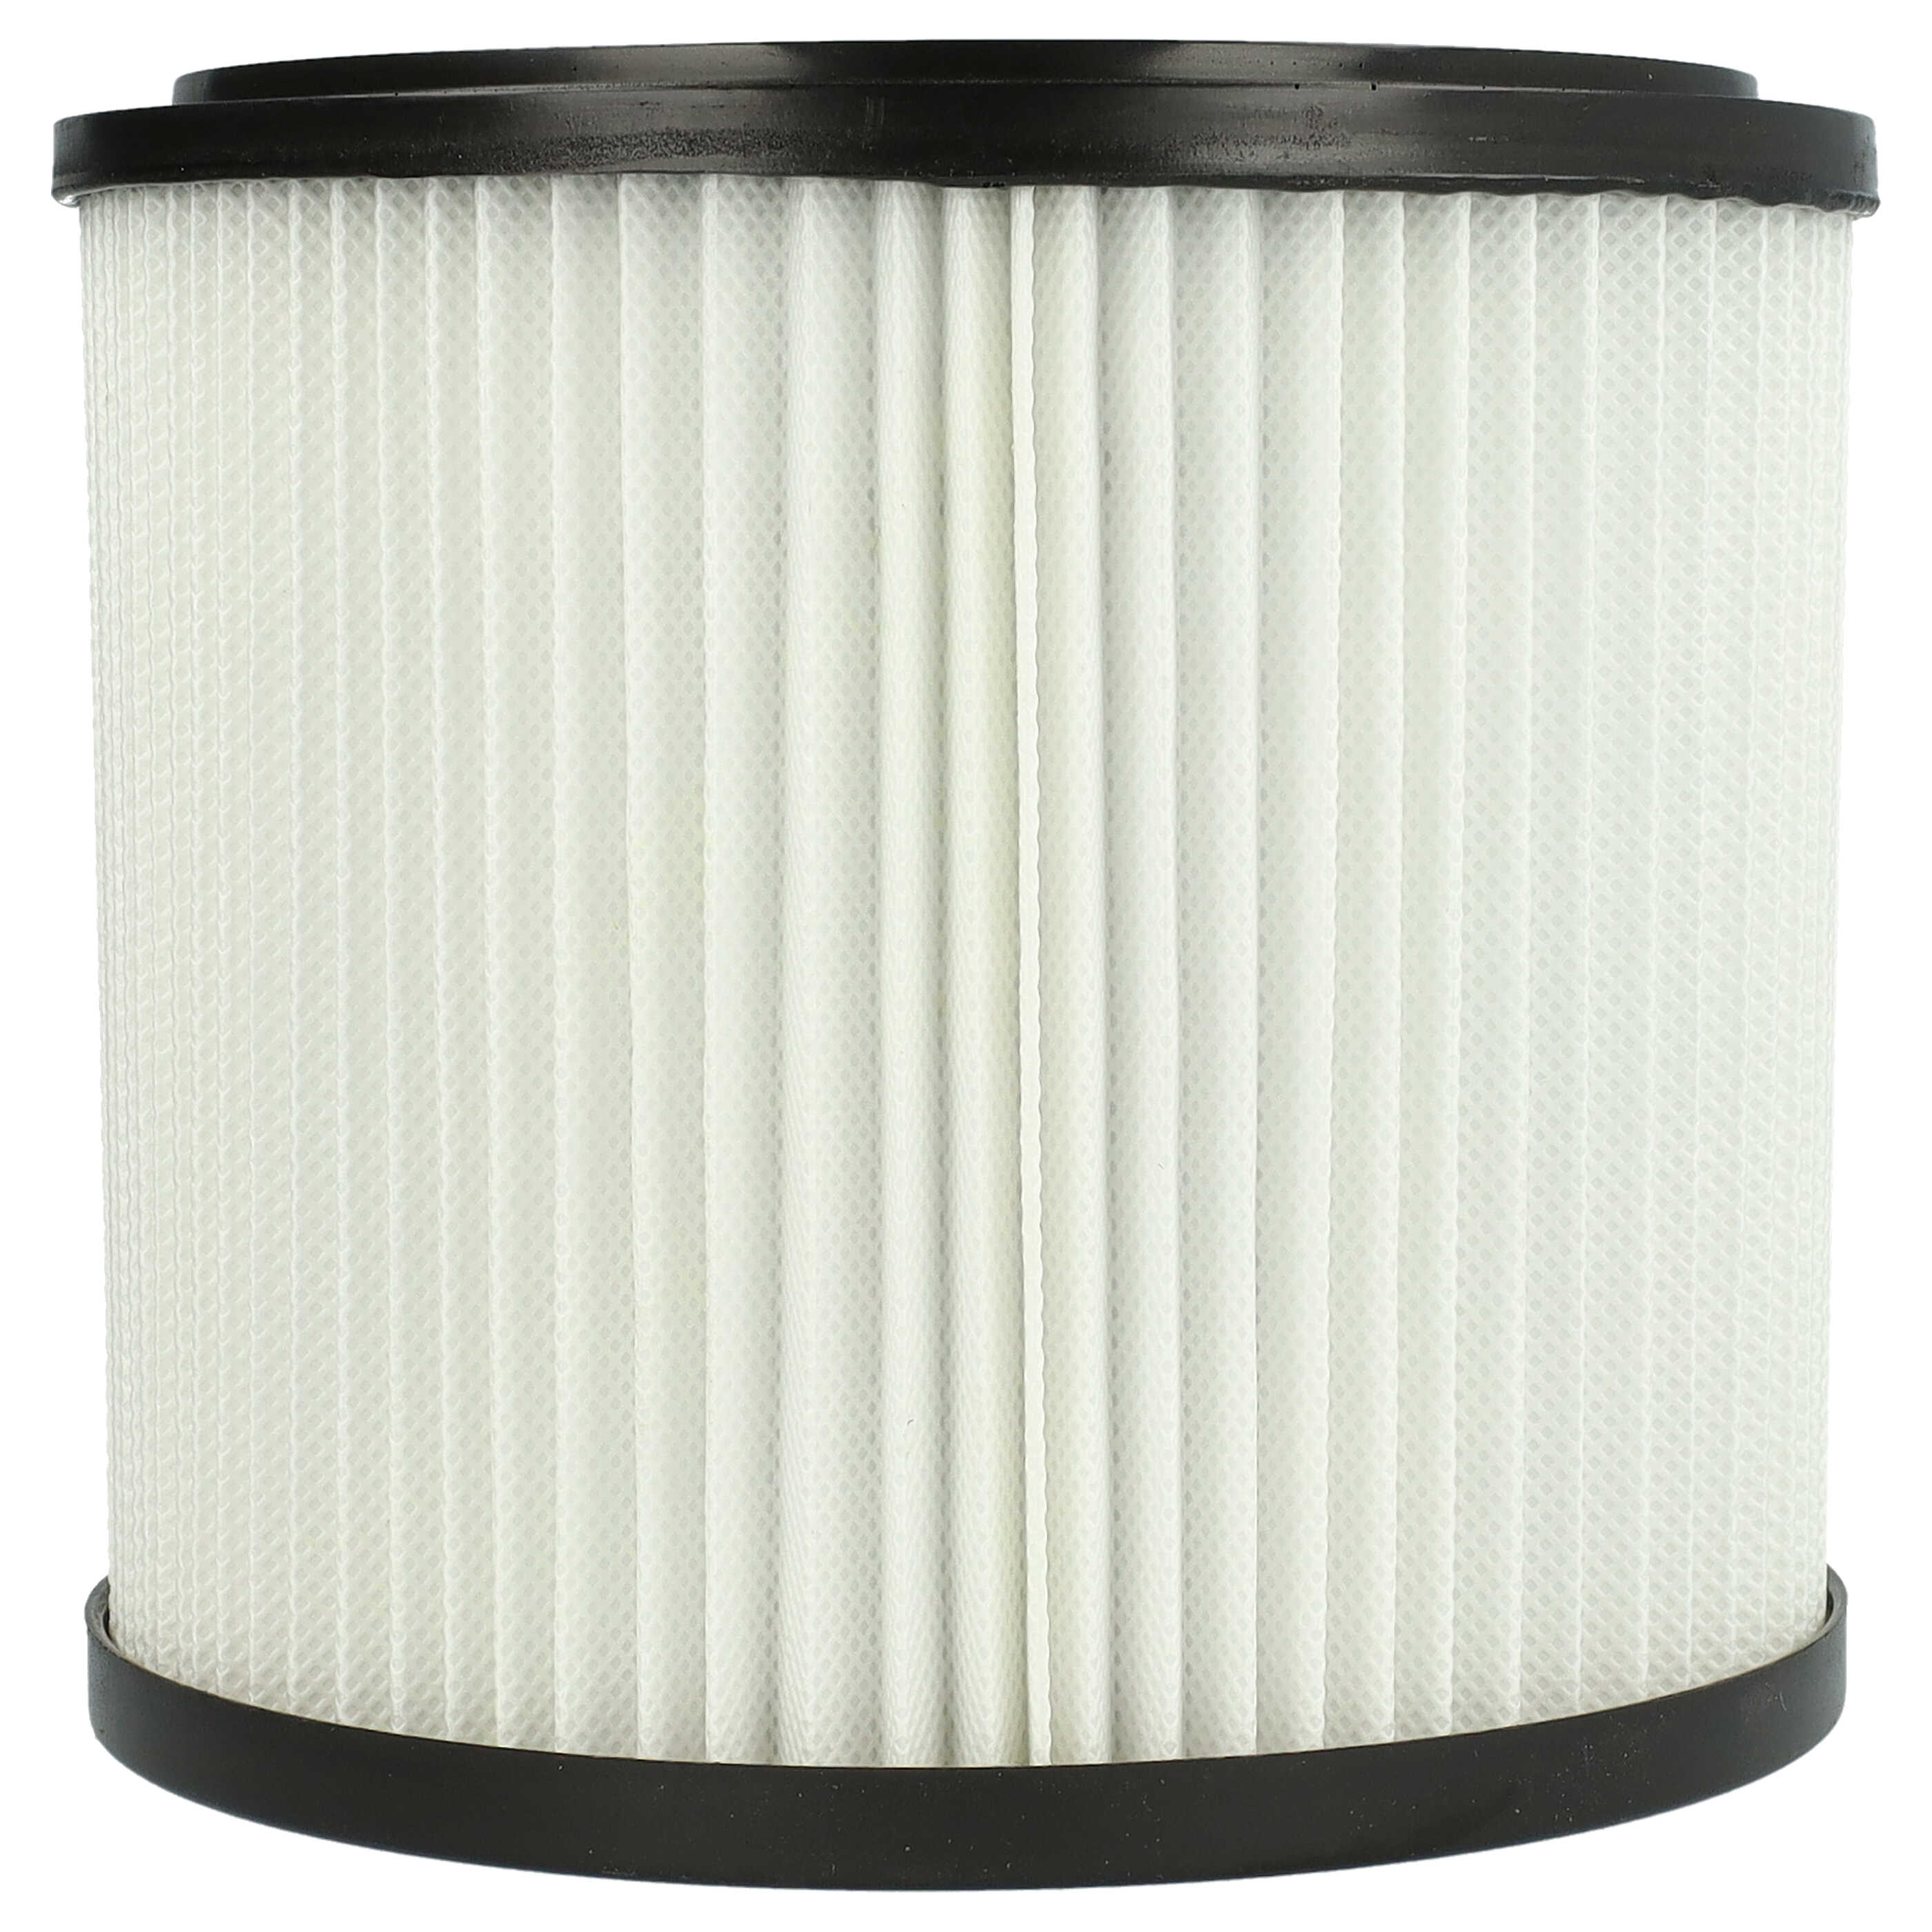 1x cartridge filter replaces Einhell 2351110 for LIV Vacuum Cleaner, black / white